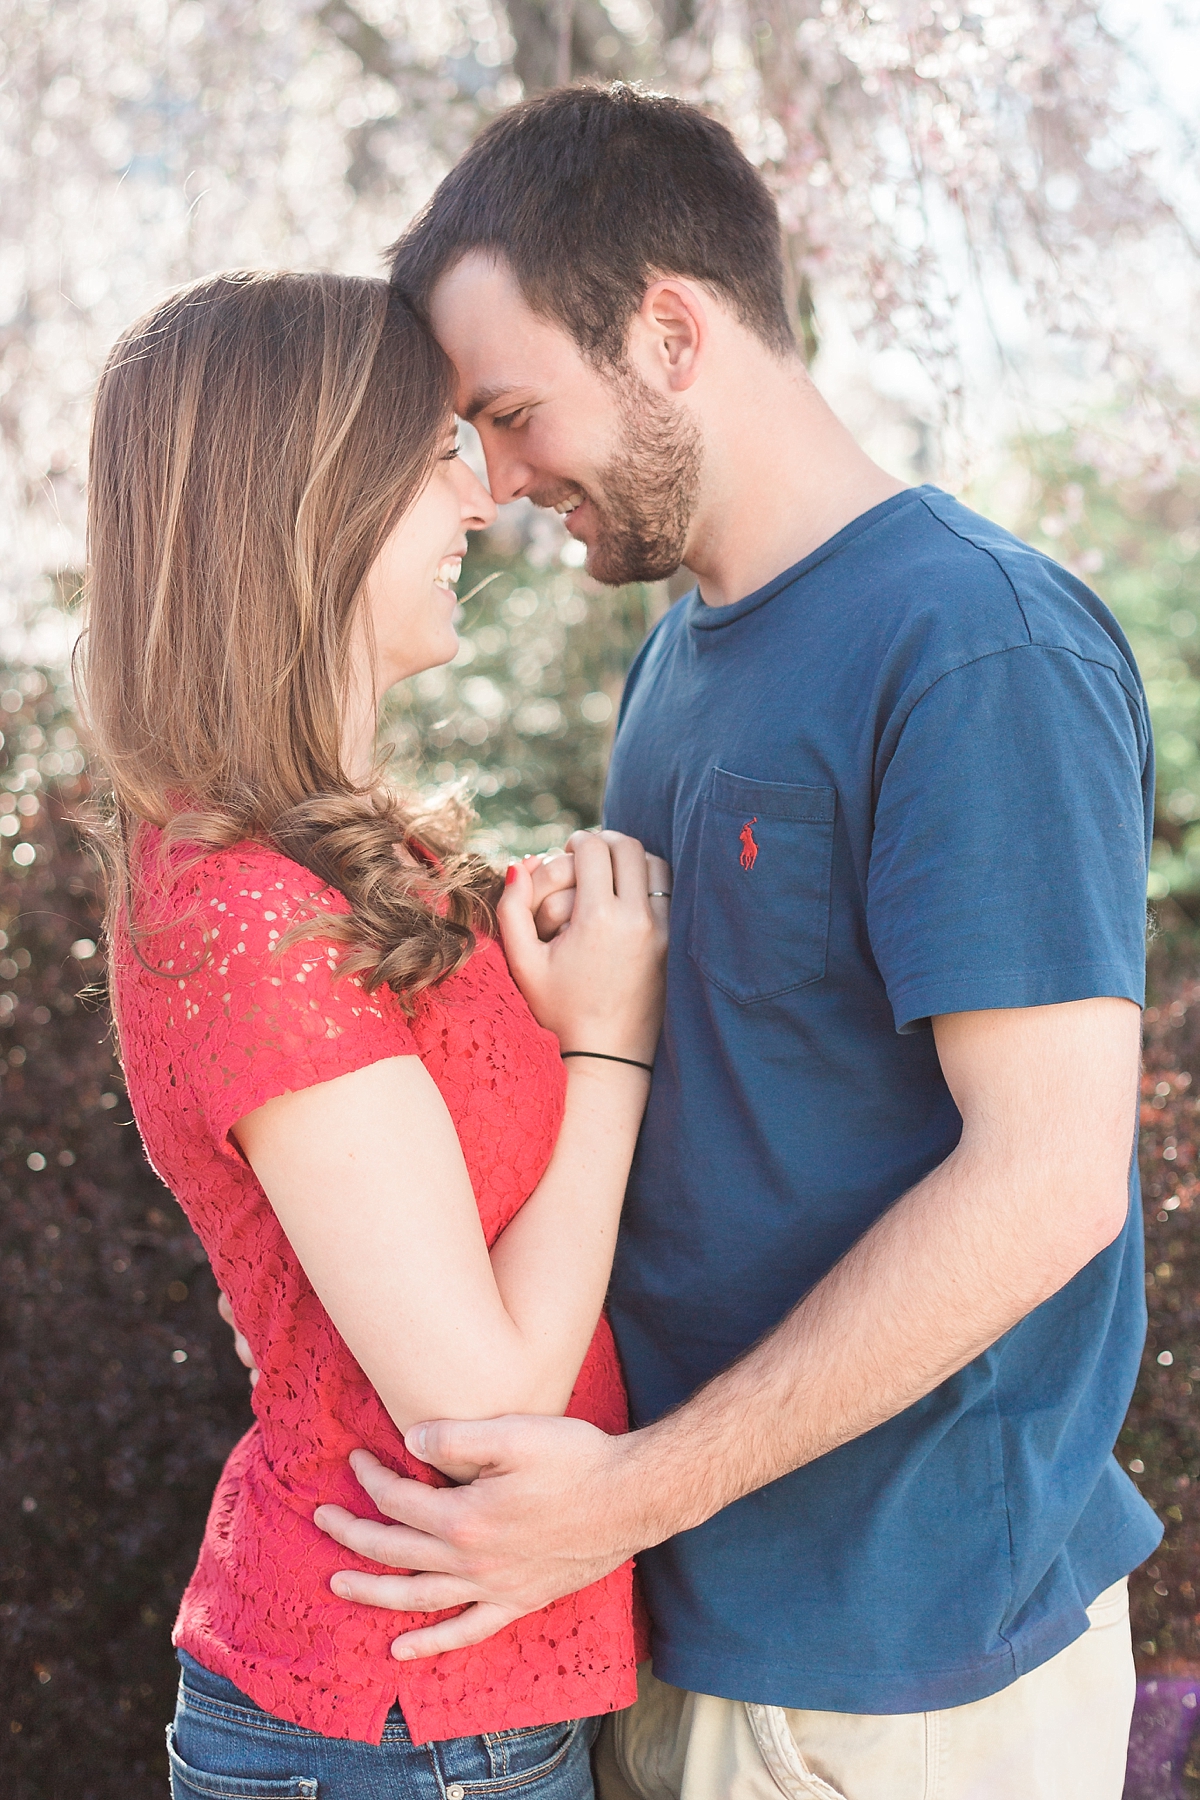 A romantic anniversary session photographed by Washington, DC wedding photographer, Alicia Lacey in Gainesville, VA.